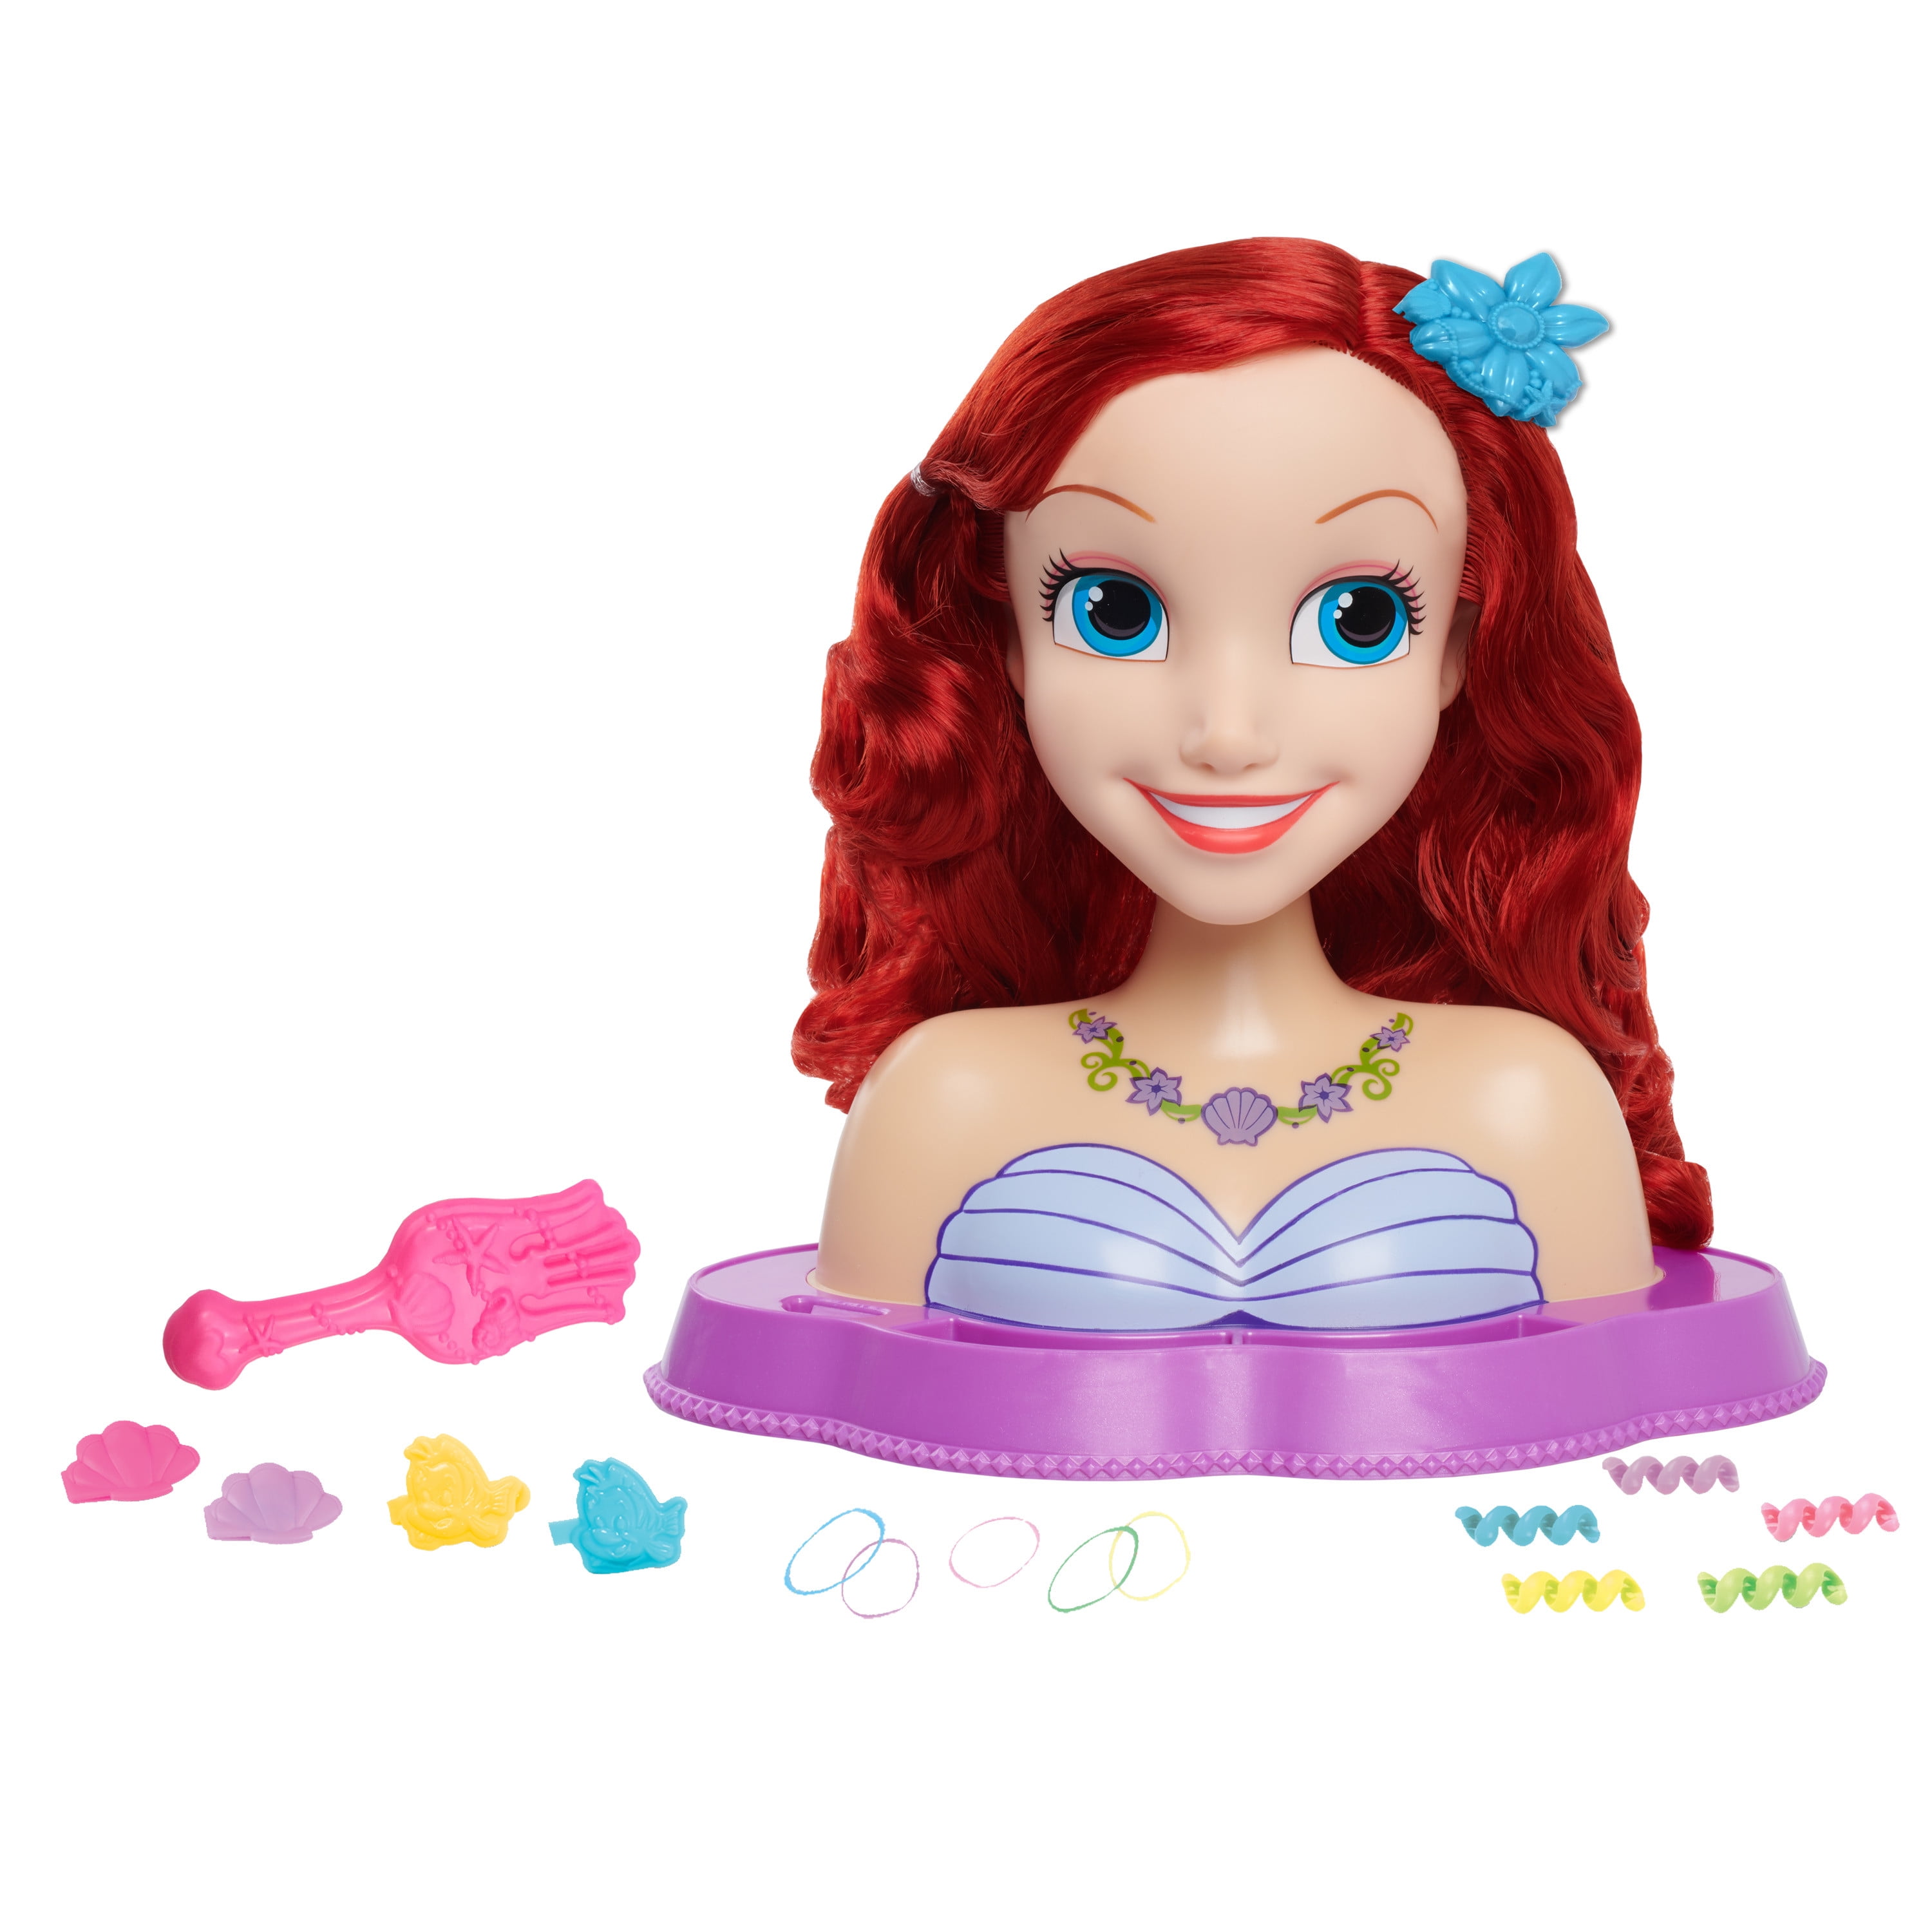 Disney Princess Ariel Styling Head, Red Hair, 17 Piece Pretend Play Set,  The Little Mermaid, Officially Licensed Kids Toys for Ages 3 Up, Gifts and  Presents 